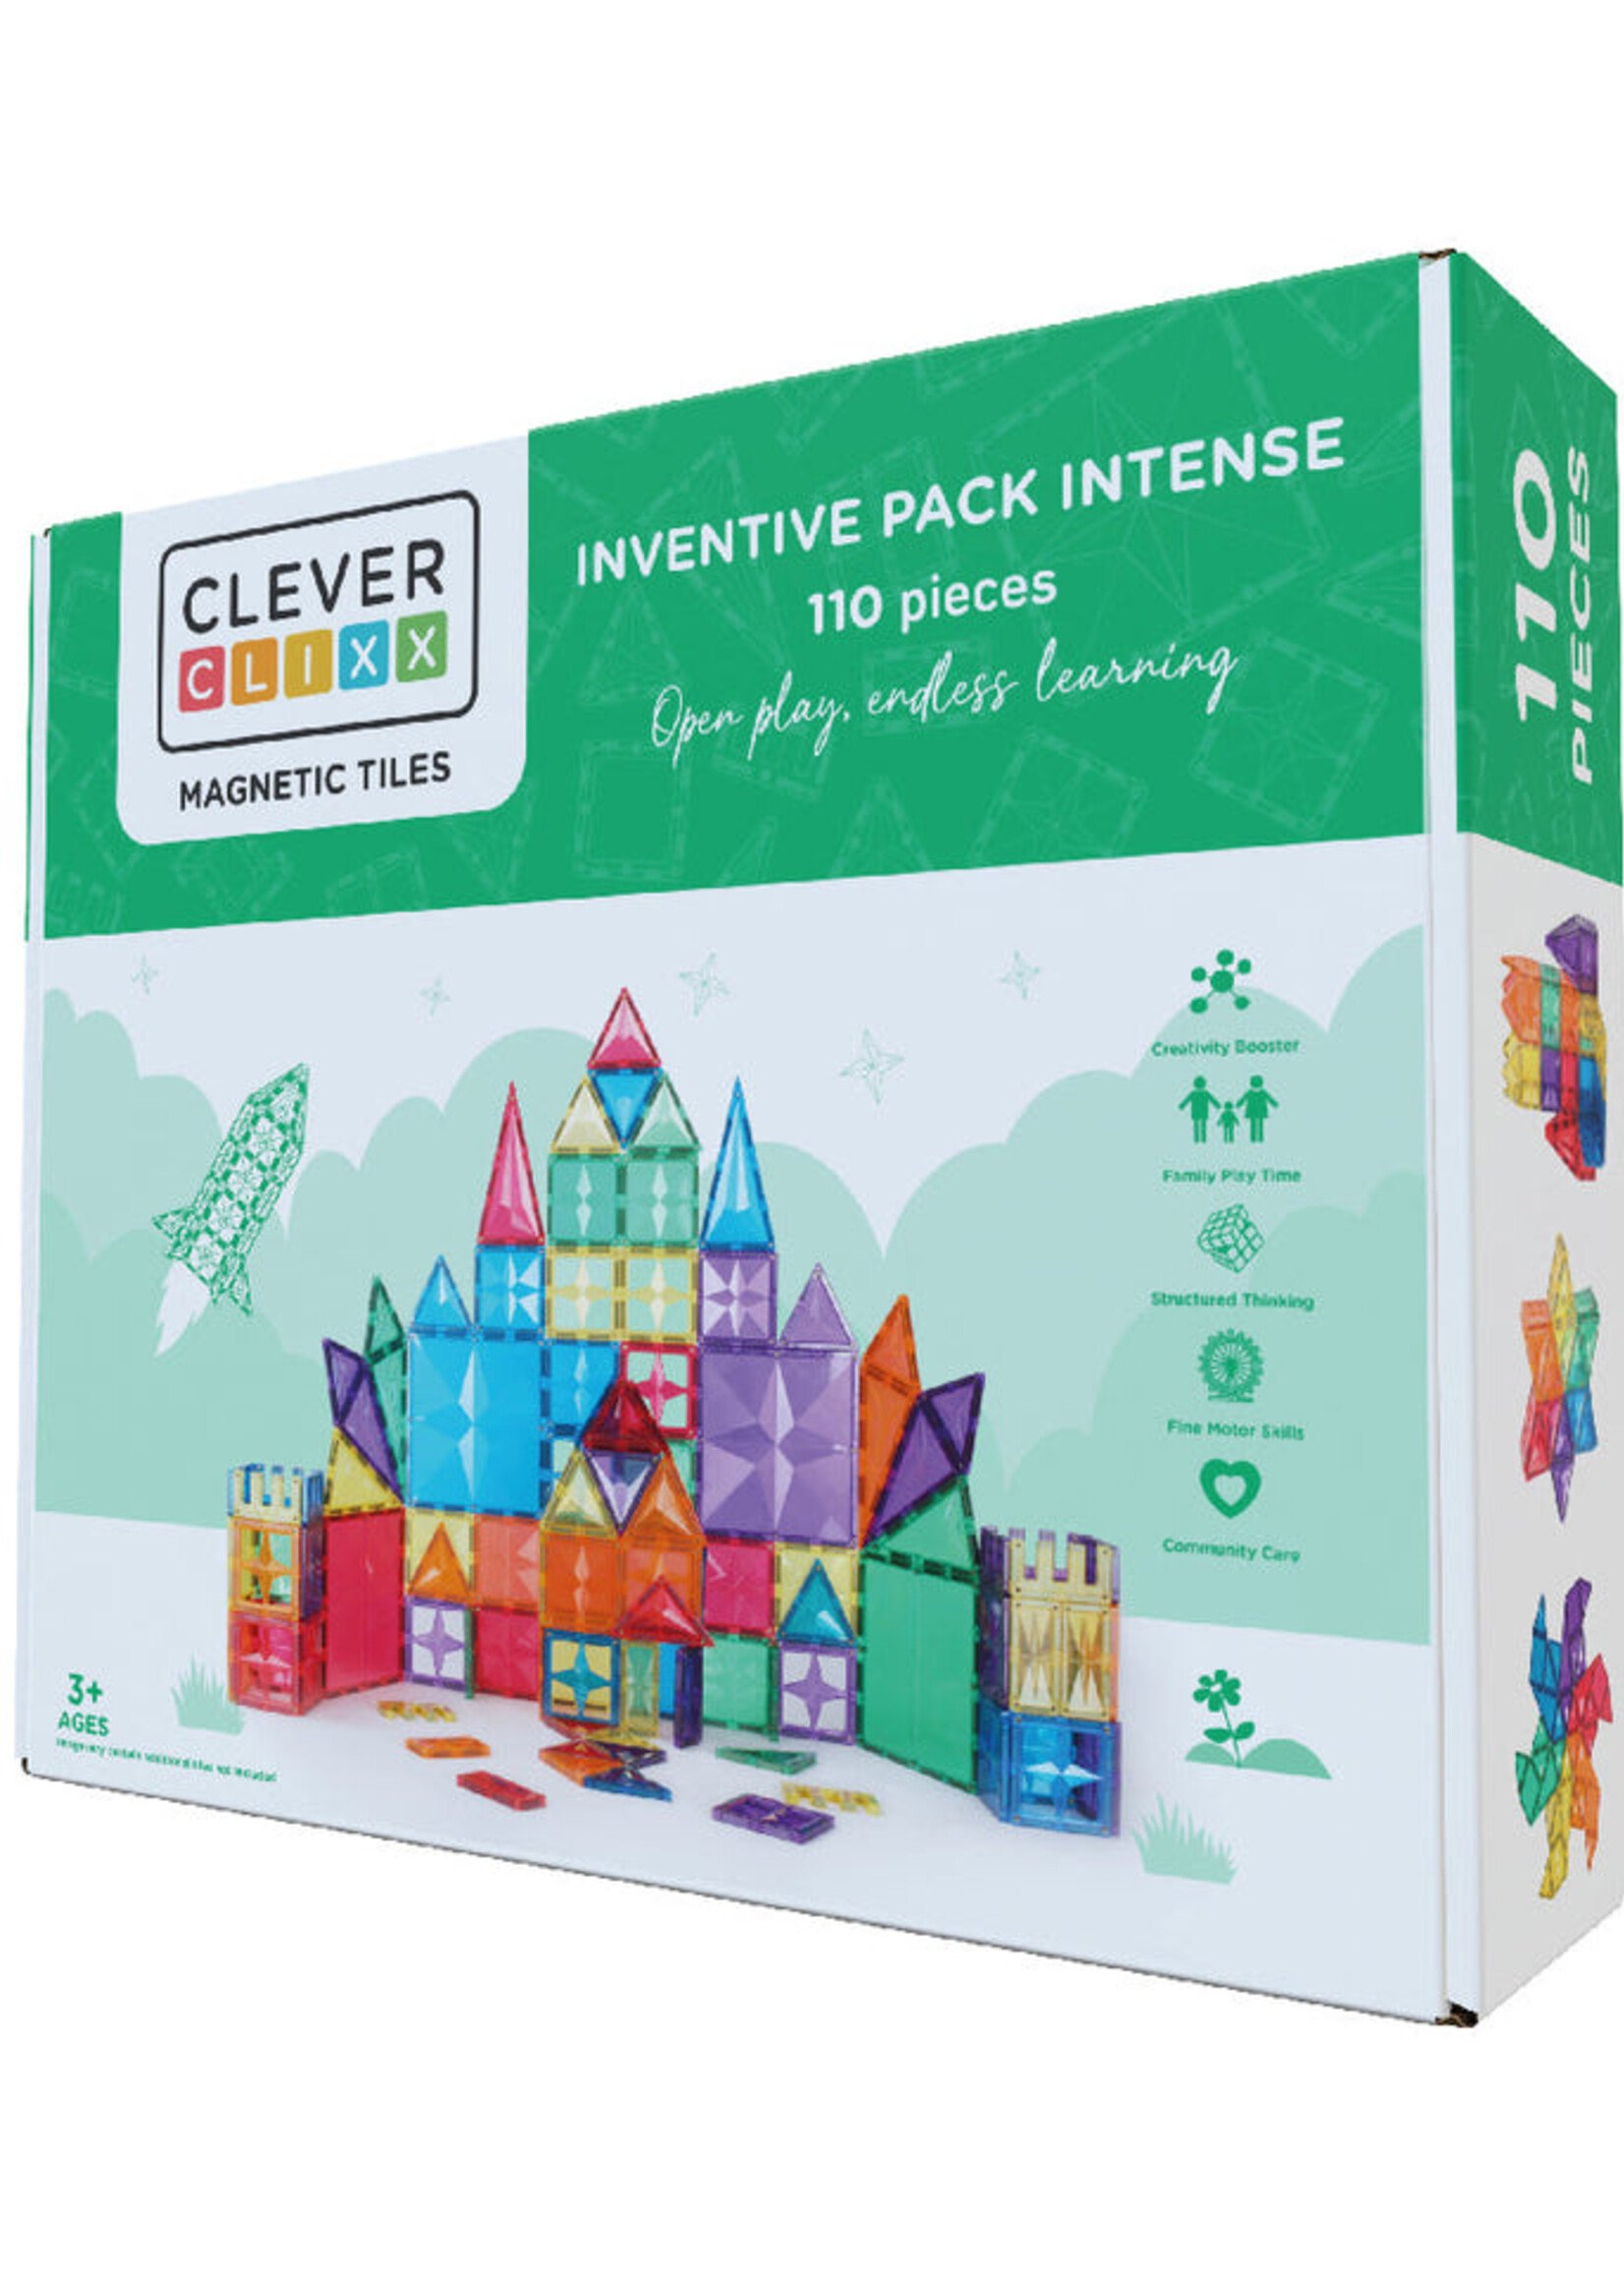 Cleverclixx Cleverclixx | Intensive Pack Intense - 110 Pieces